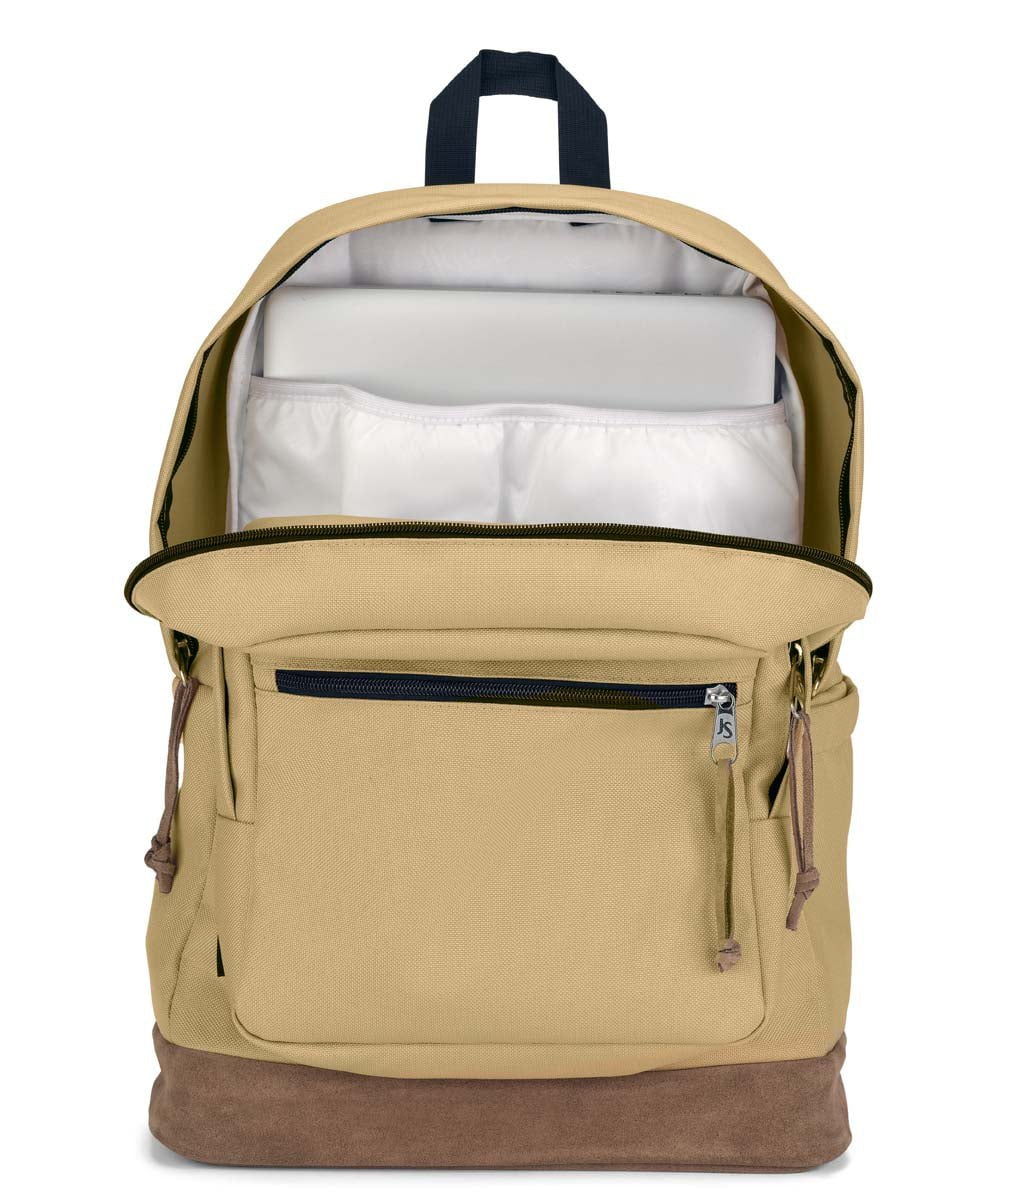 JanSport Right Pack Backpack - Currie